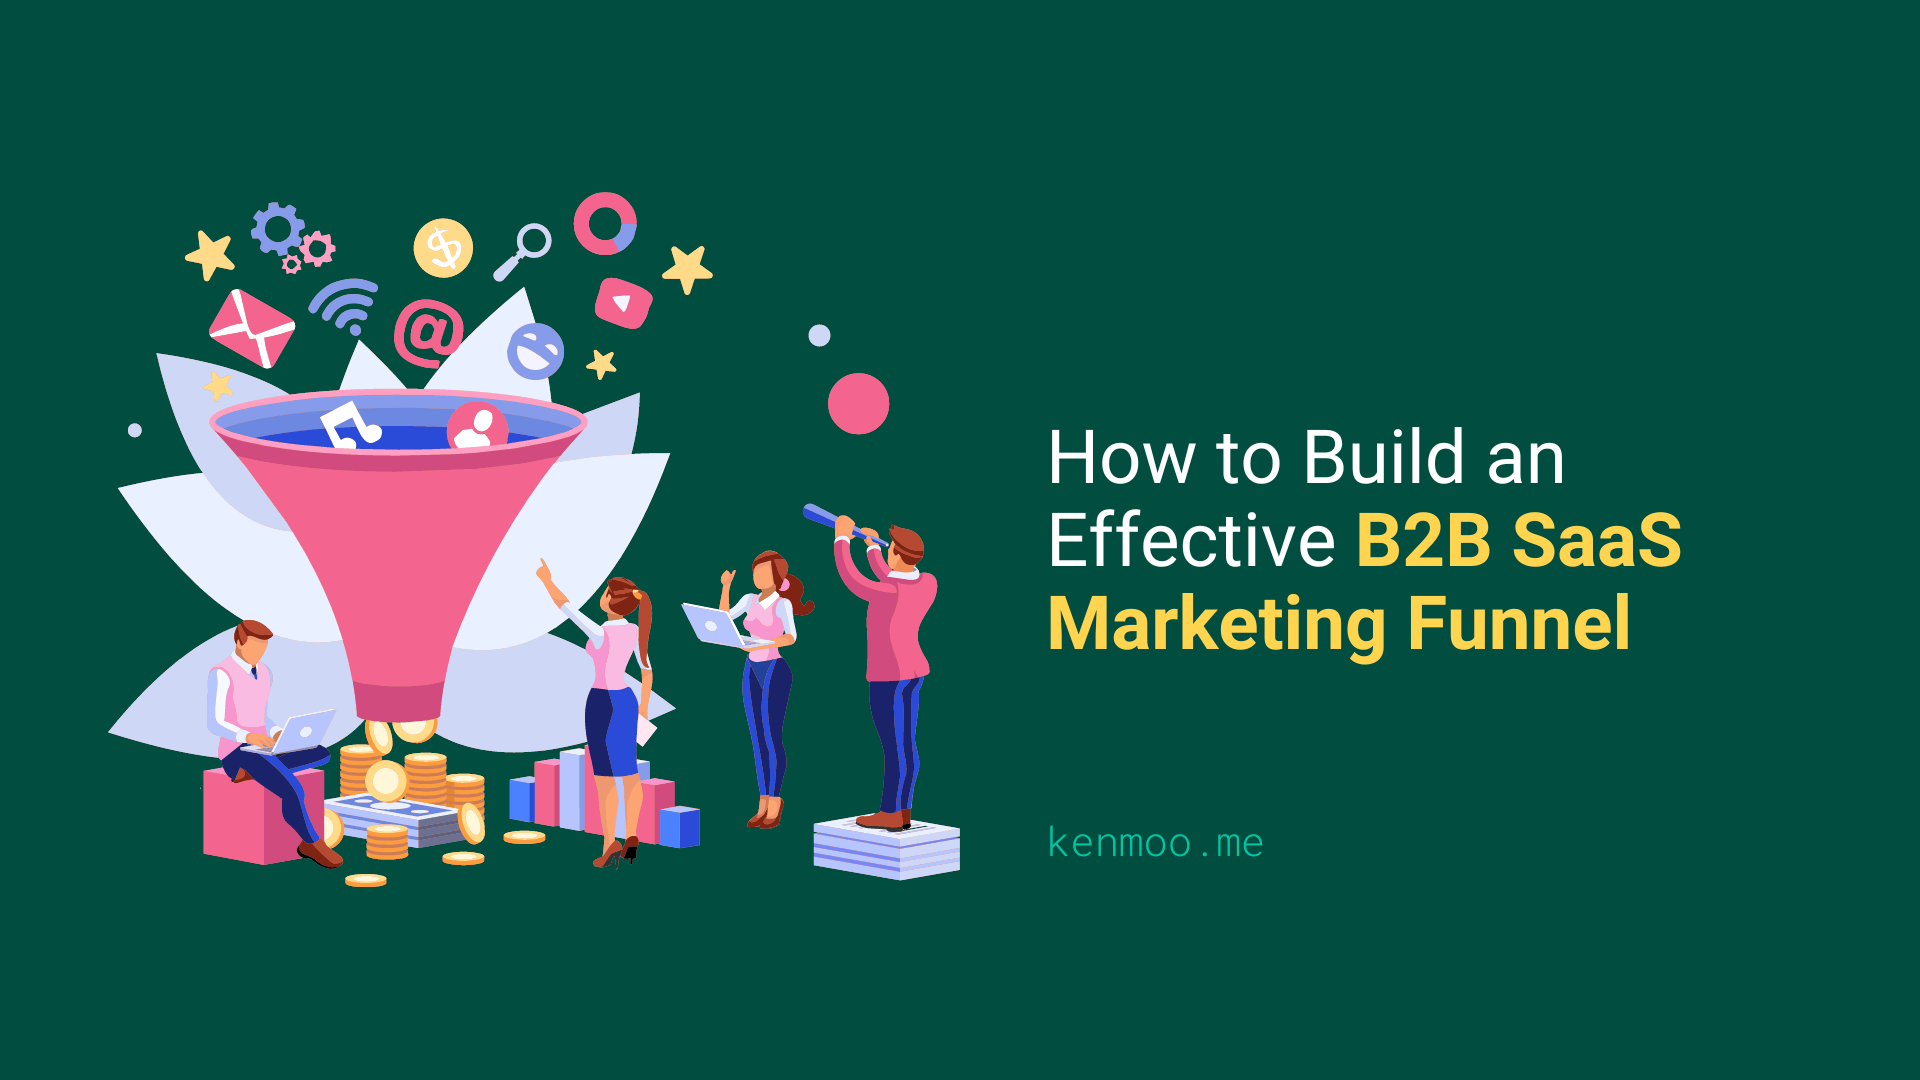 How to Build an Effective B2B SaaS Marketing Funnel